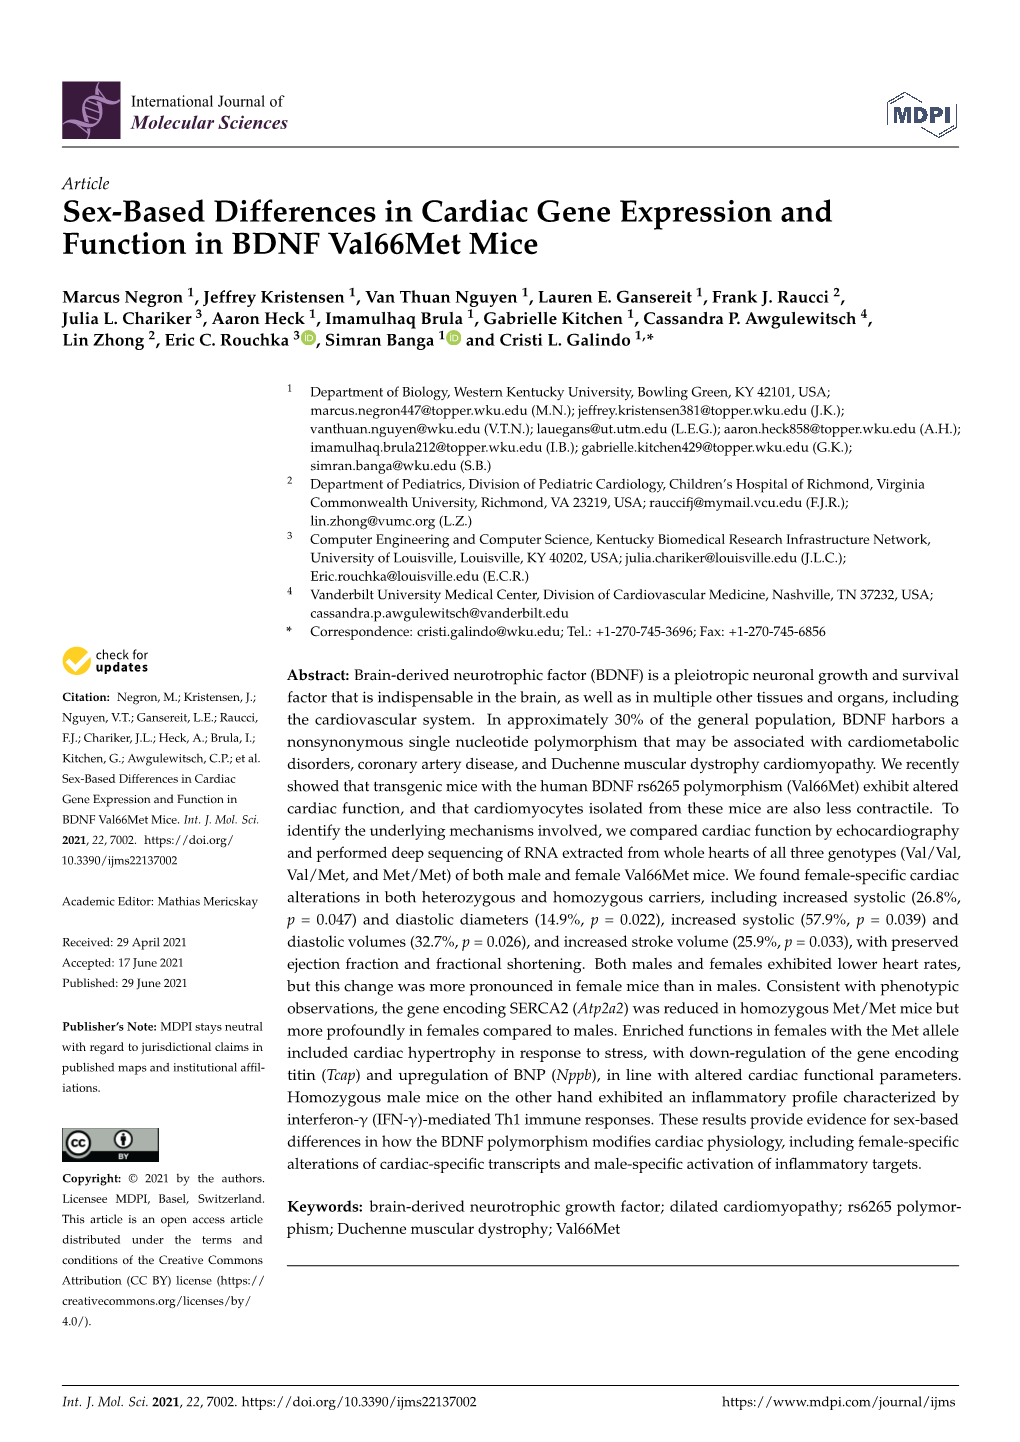 Sex-Based Differences in Cardiac Gene Expression and Function in BDNF Val66met Mice